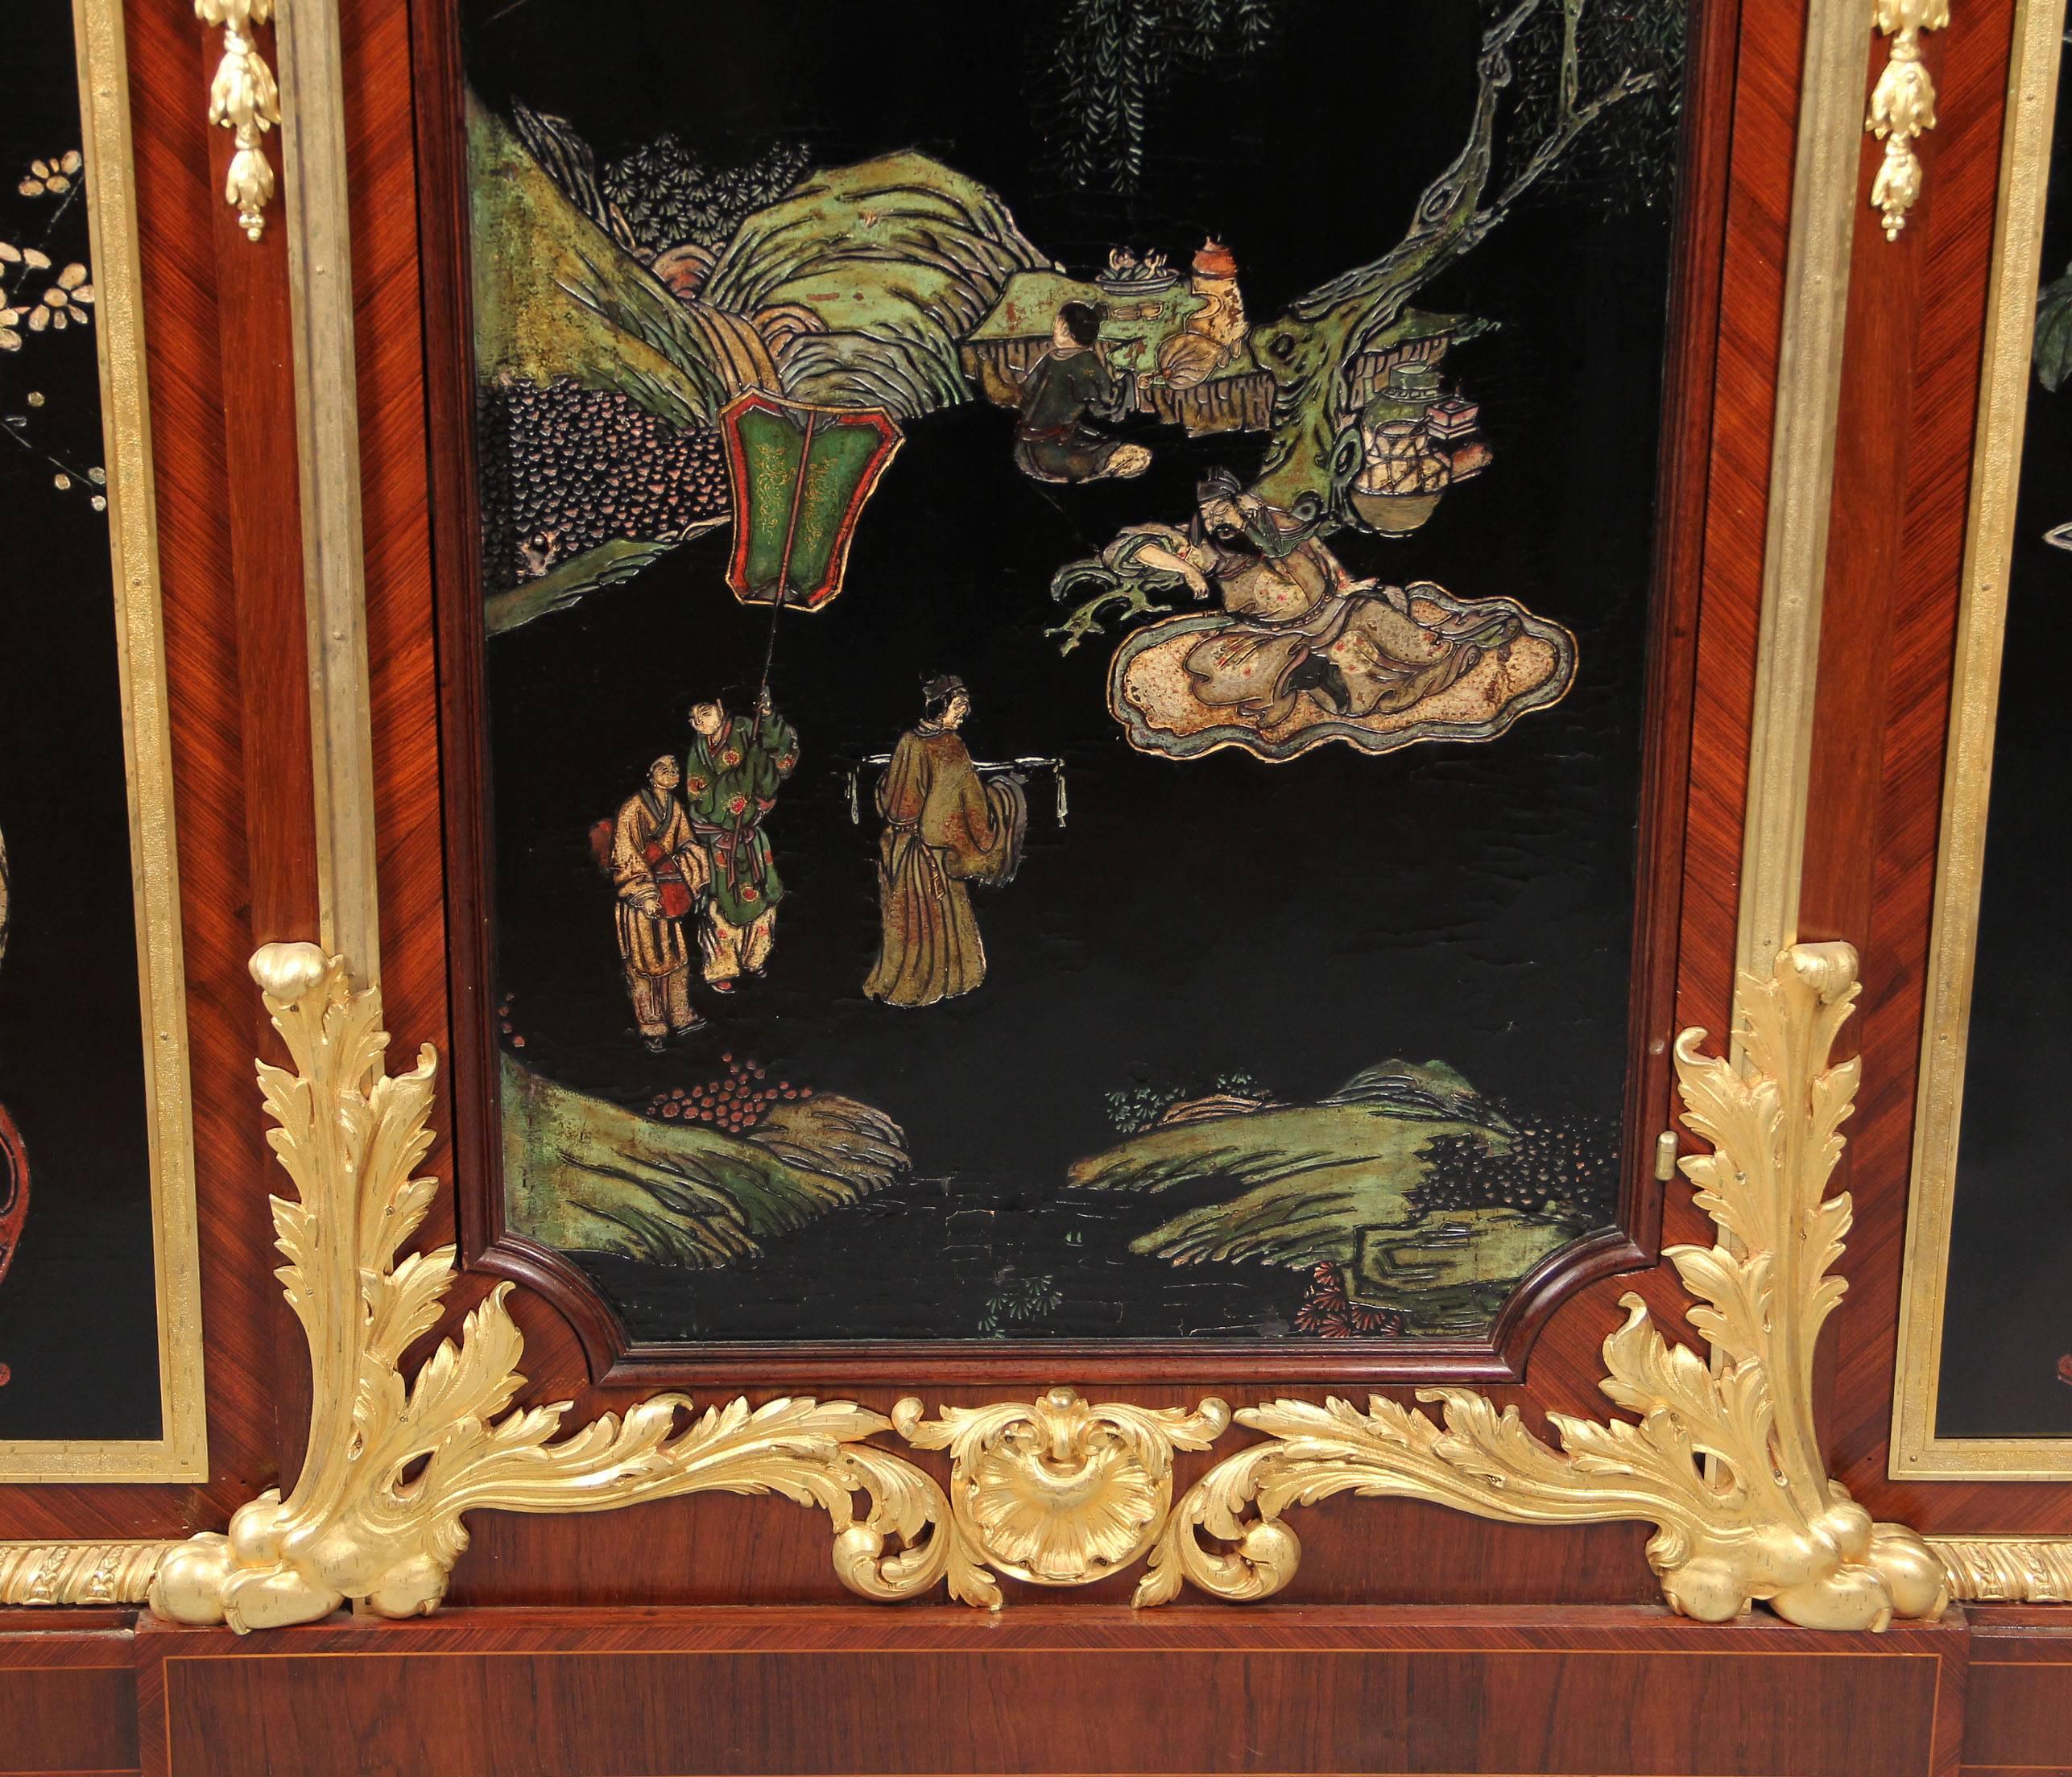 A beautiful late 19th century gilt bronze-mounted Louis XVI style Coromandel lacquer cabinet

By Maison Forest.

Marble top above a bronze-mounted drawer, cabinet with three Coromandel lacquered scenes, the middle door opens for storage, side